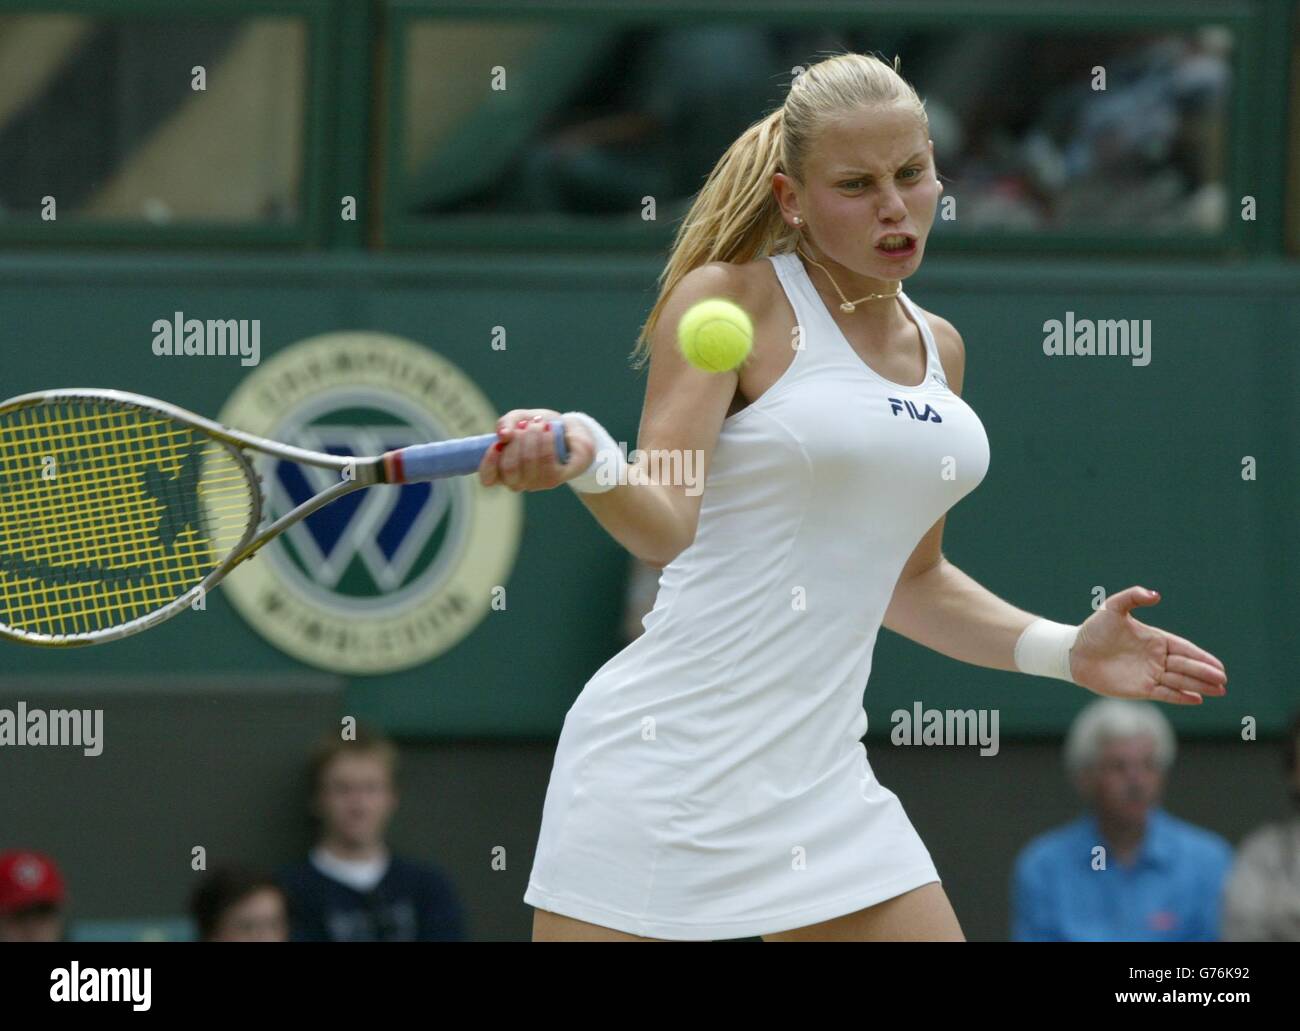 Yugoslavian Jelena Dokic, the 7th seed in action before defeating Nathalie Dechy of France on Centre Court at Wimbledon. Final score 7:5/6:2. Stock Photo